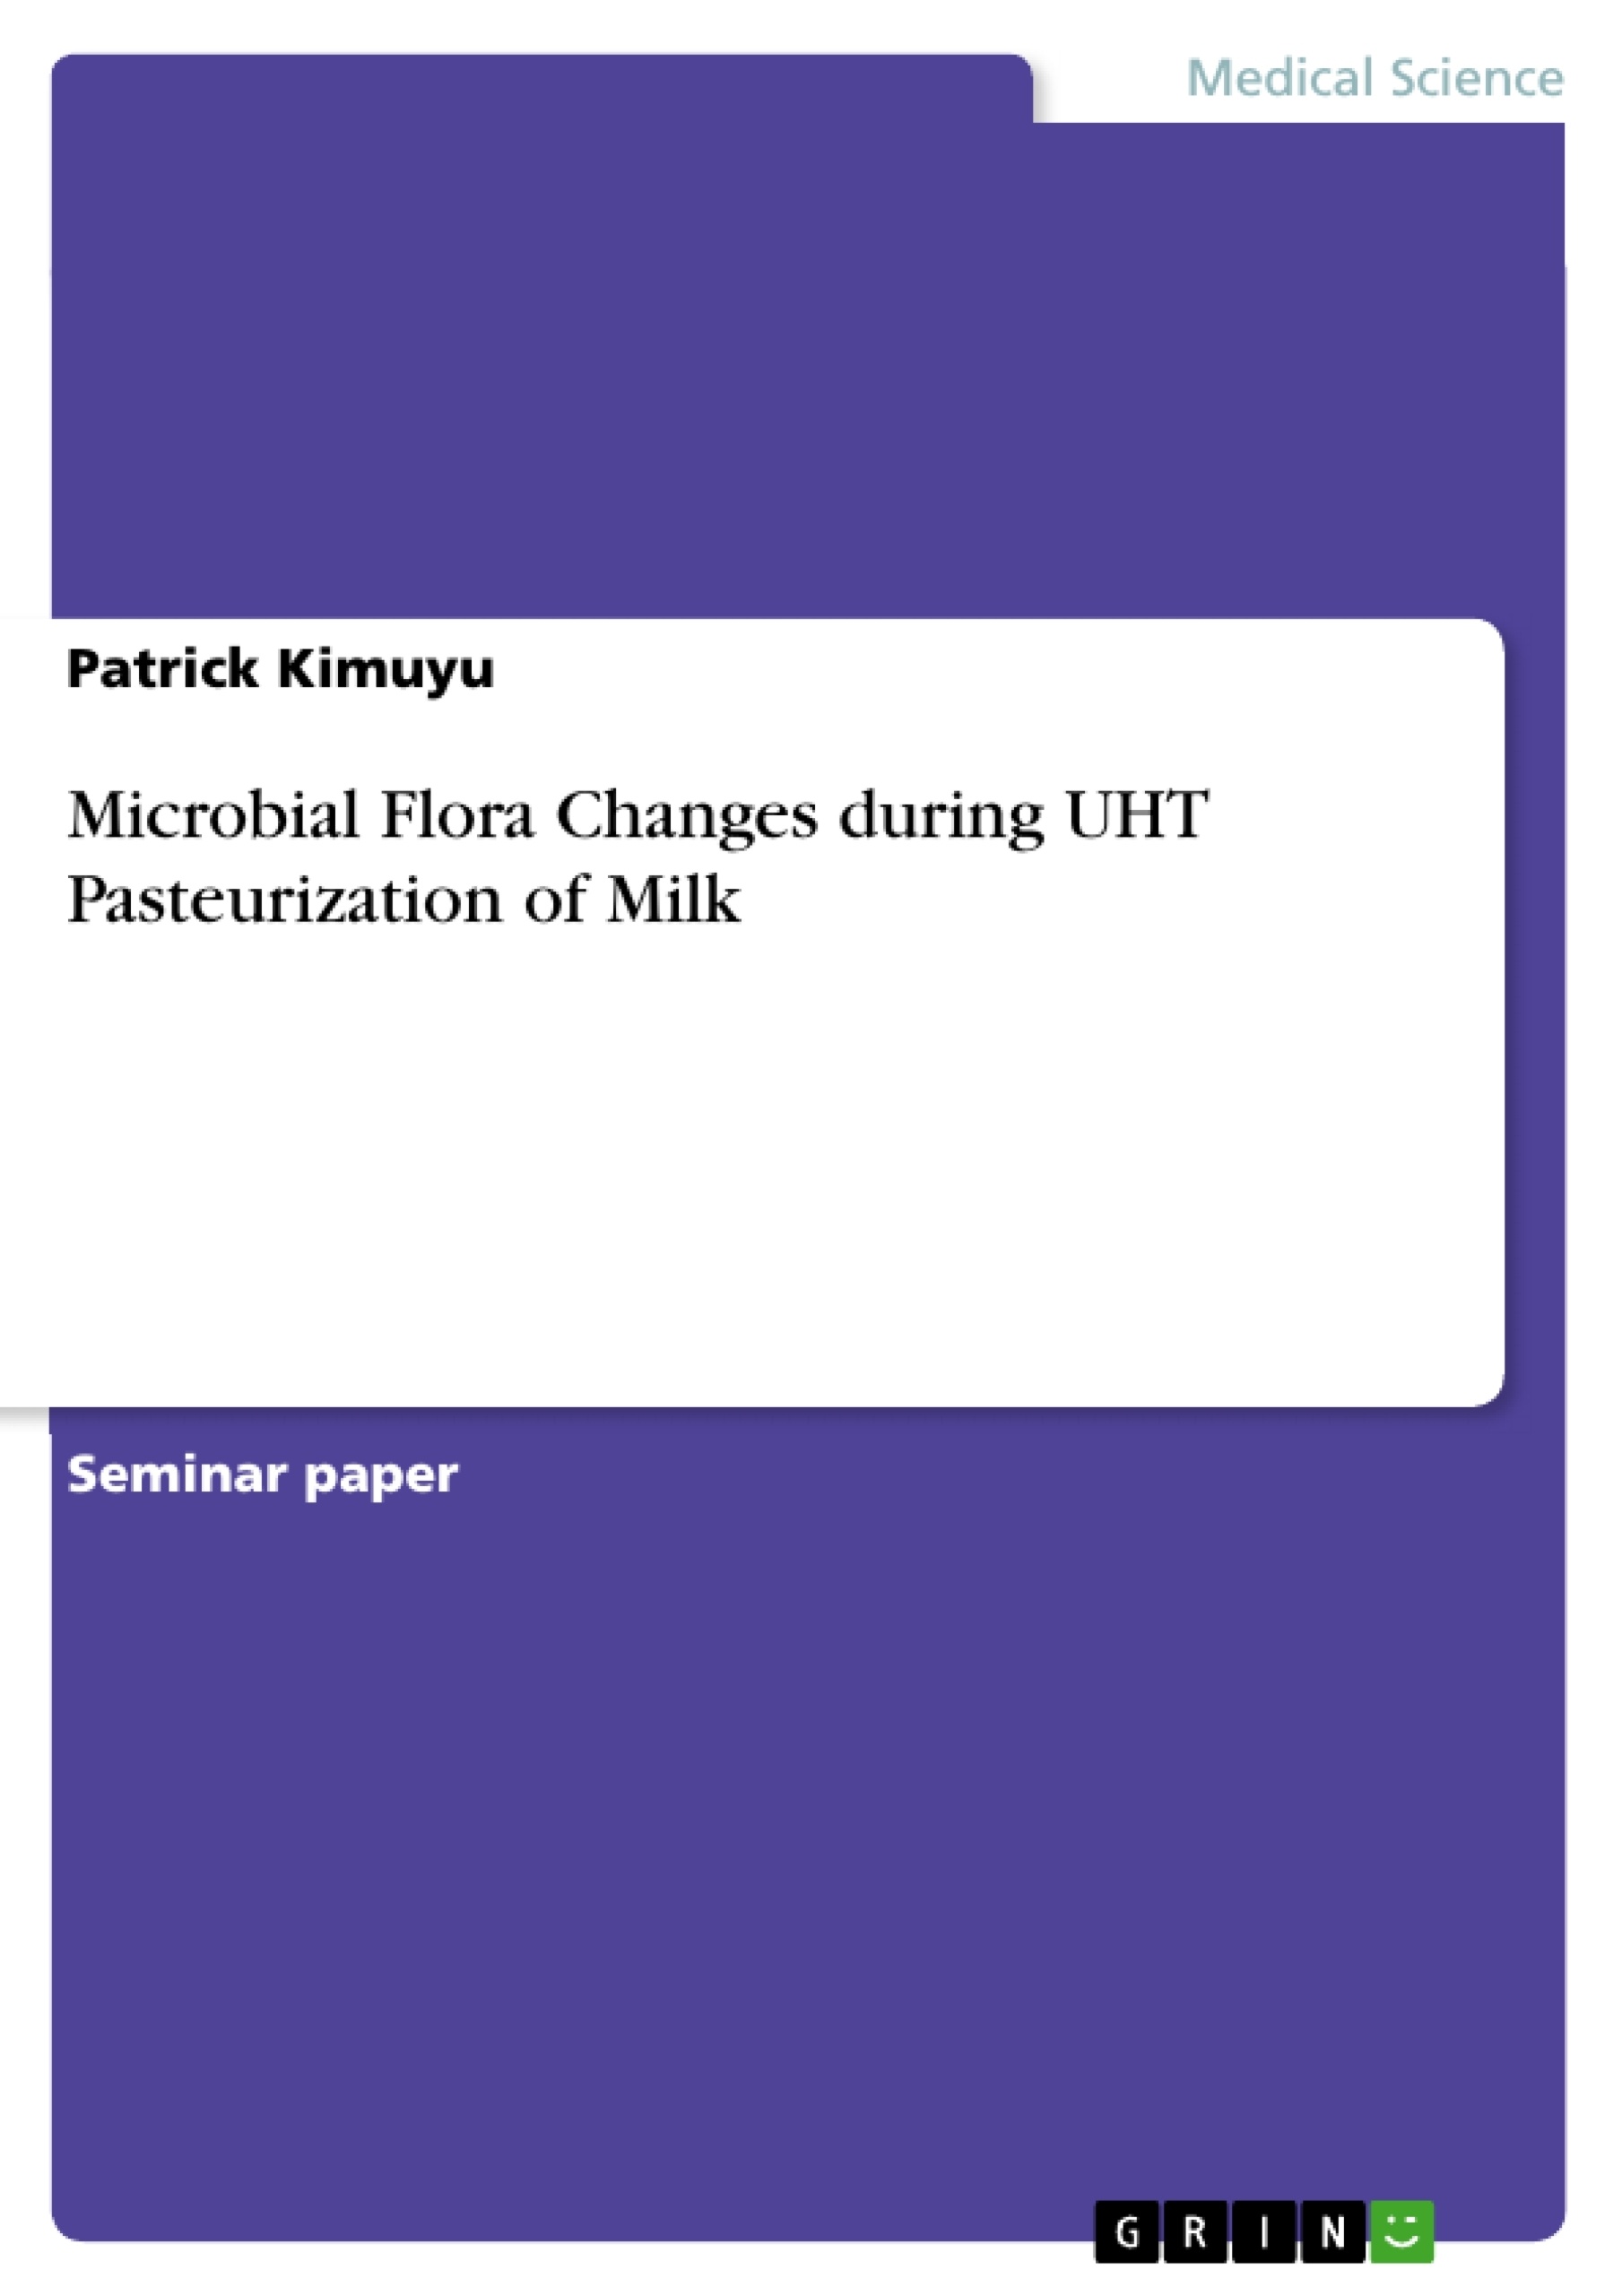 Titre: Microbial Flora Changes during UHT Pasteurization of Milk